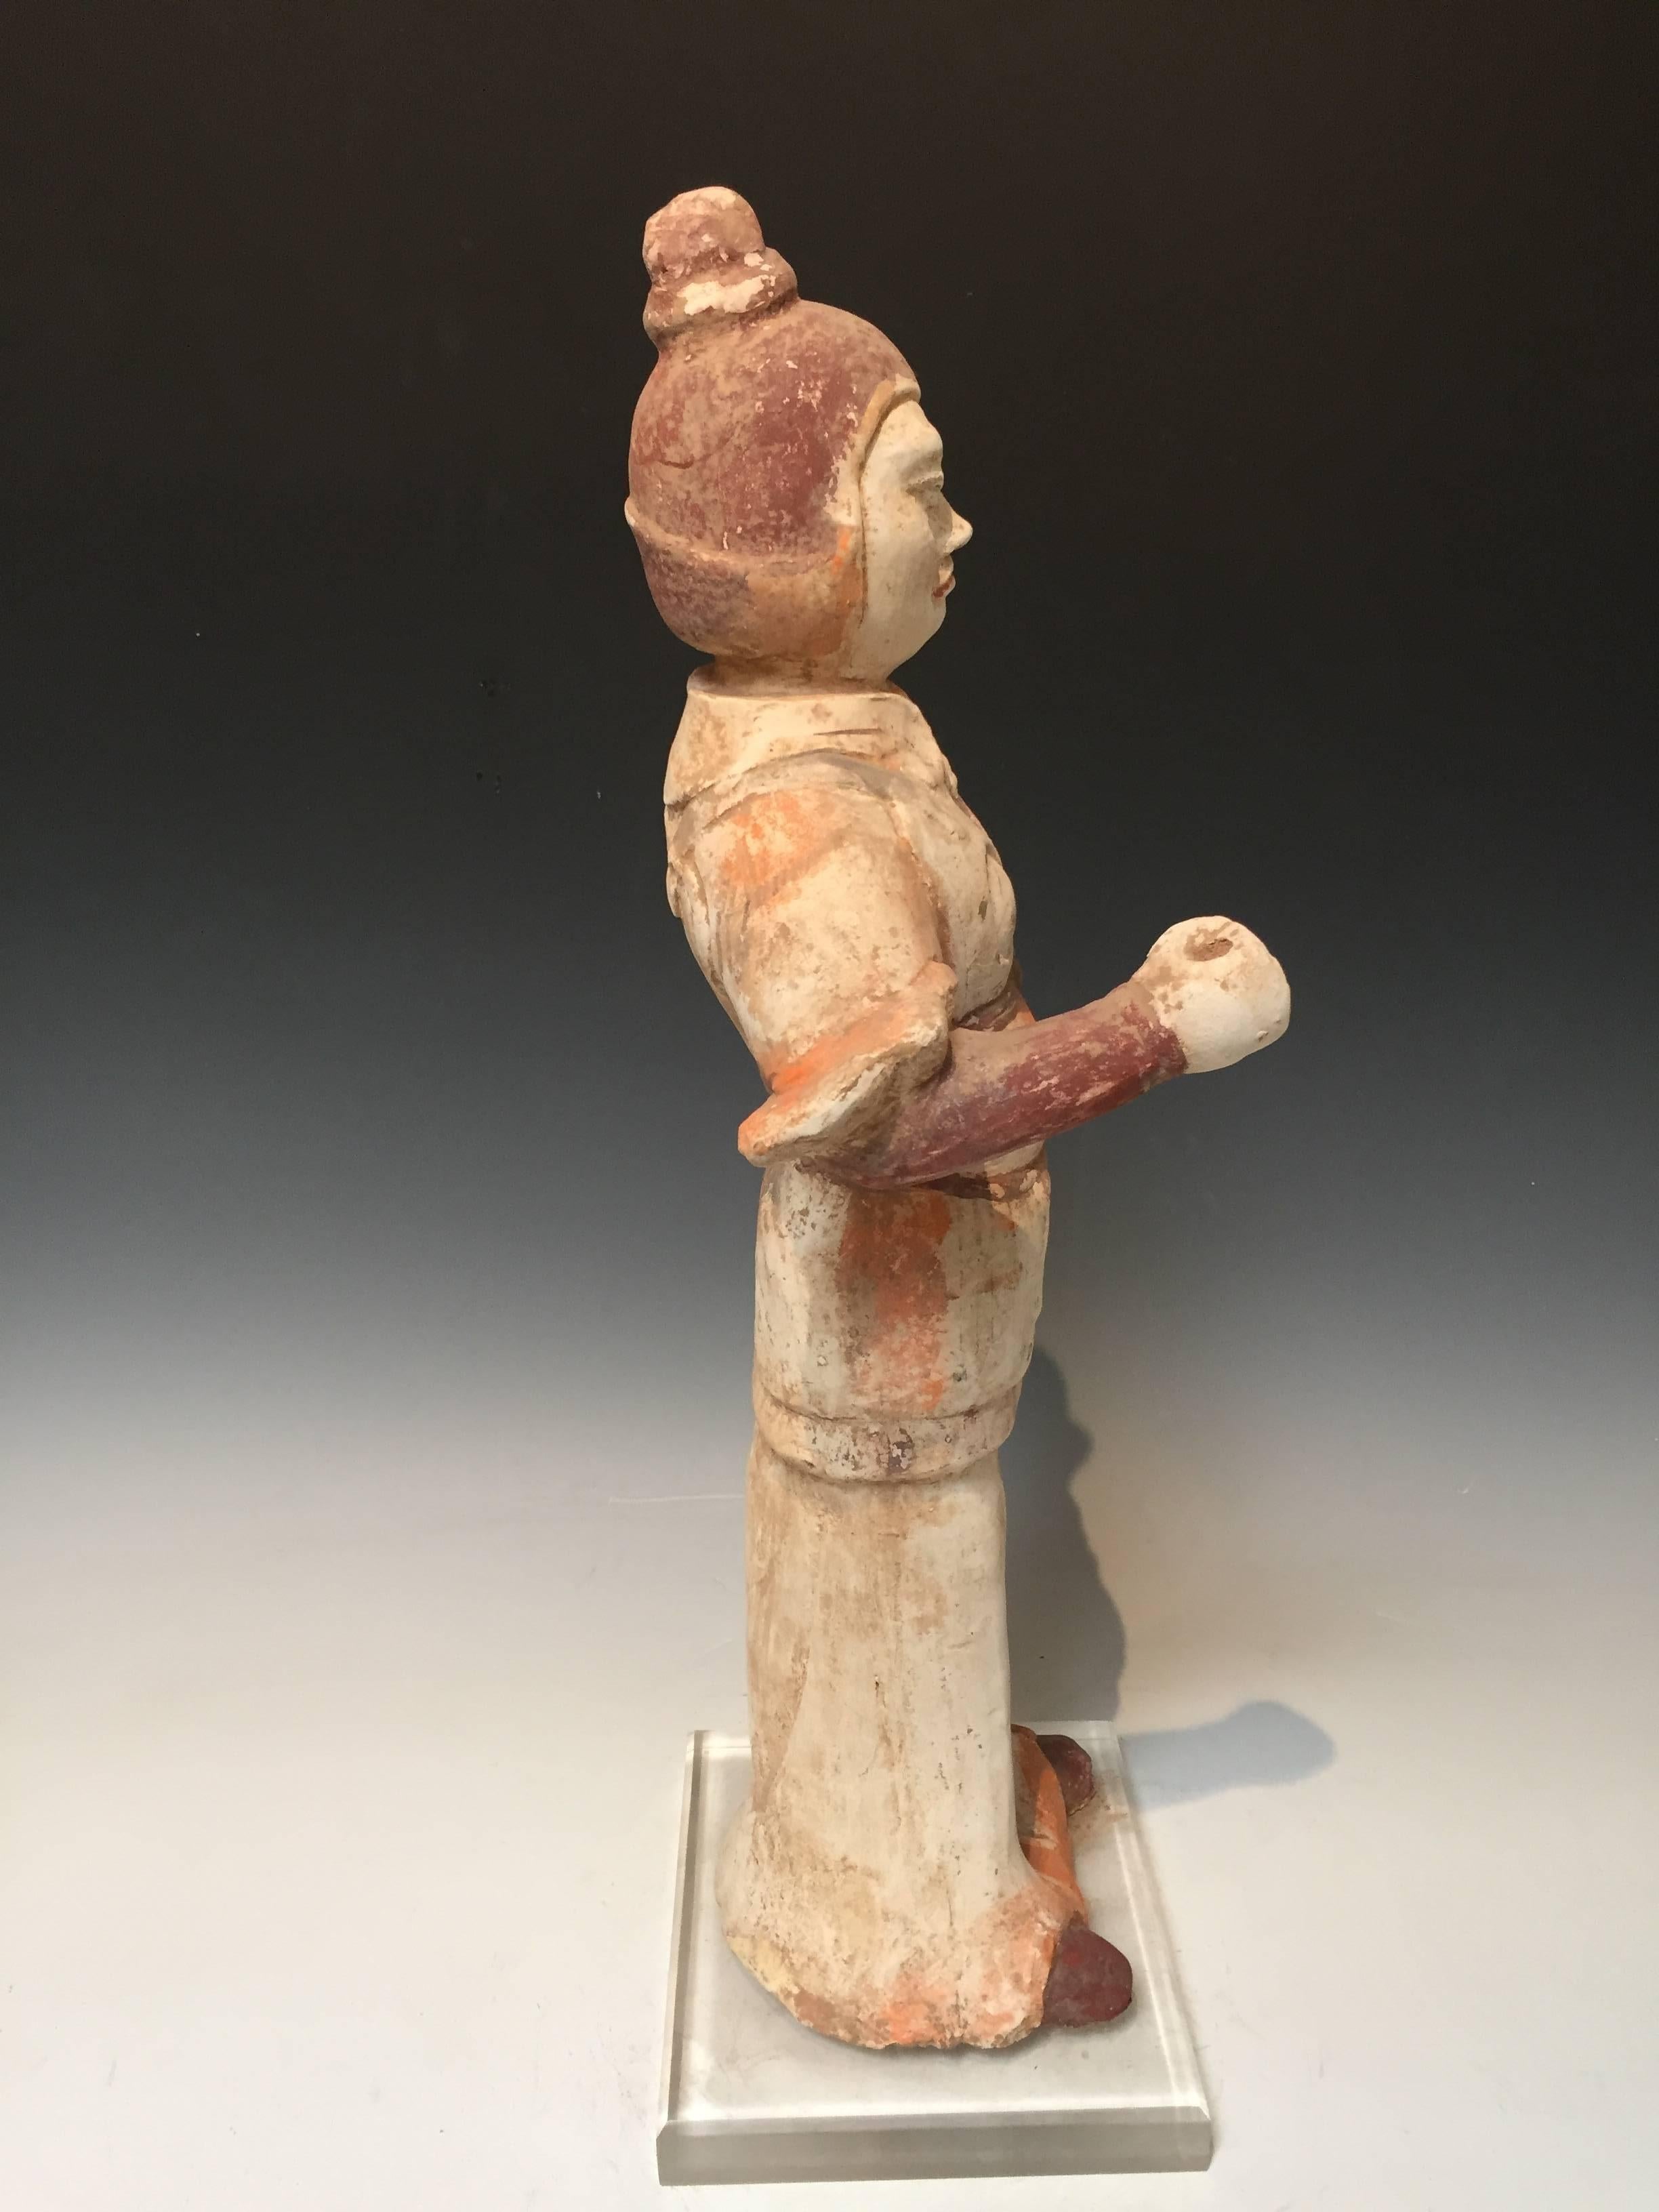 Standing tall with his right arm extended in a warrior pose, this impressive Tang dynasty pottery Attendant is adorned in military garb. Some original pigment still remains.
Measure: 23" tall x 6" deep x 6" wide.